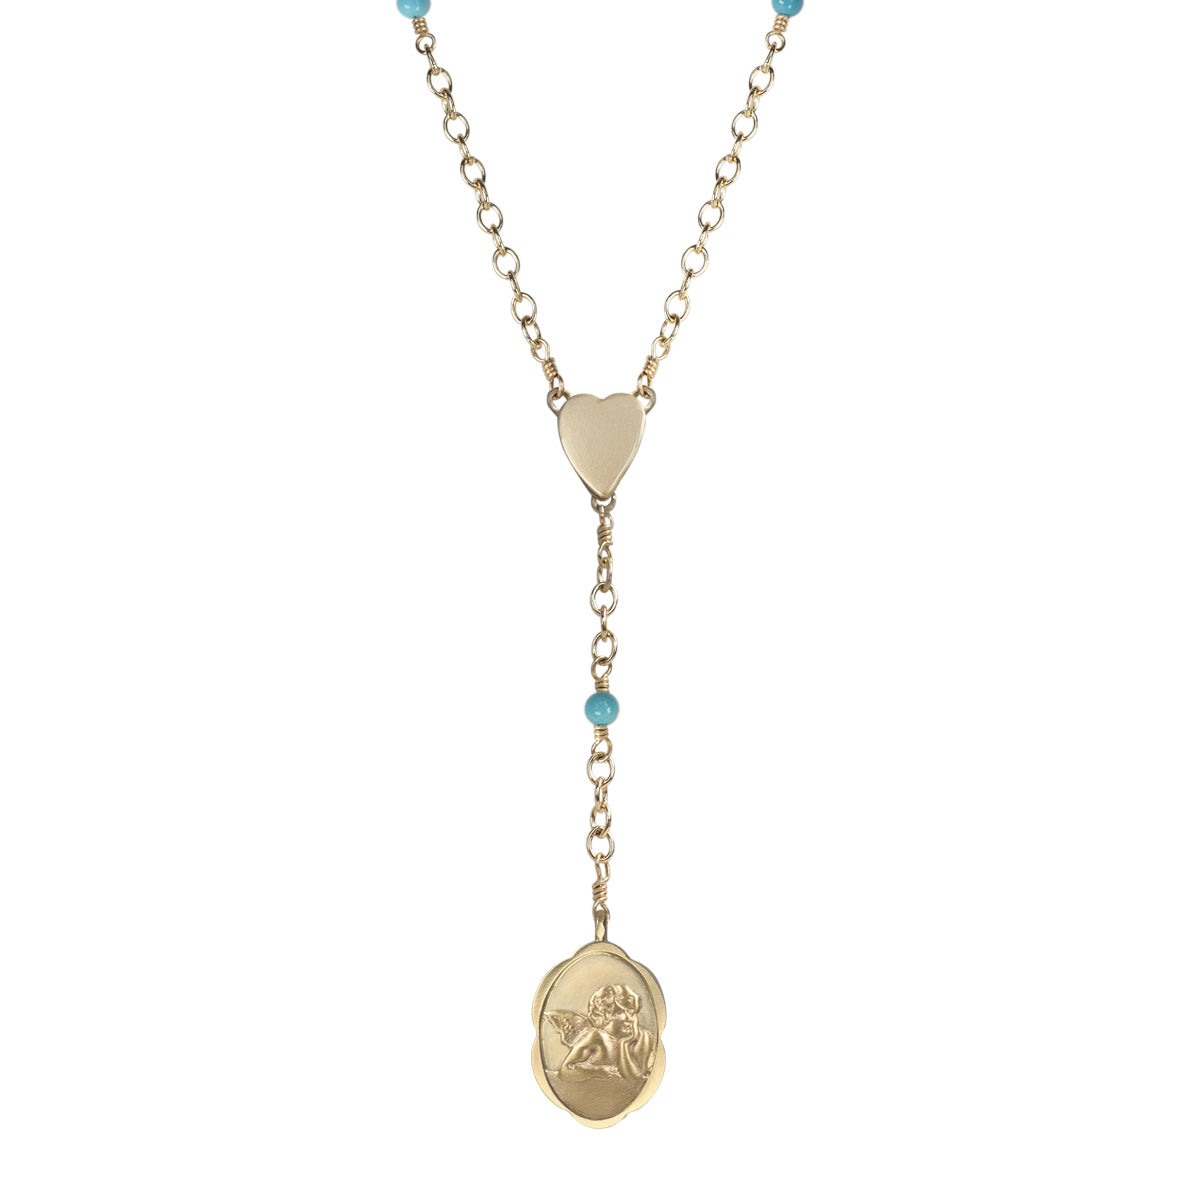 10K Gold Angel Rosary Necklace on Turquoise Chain